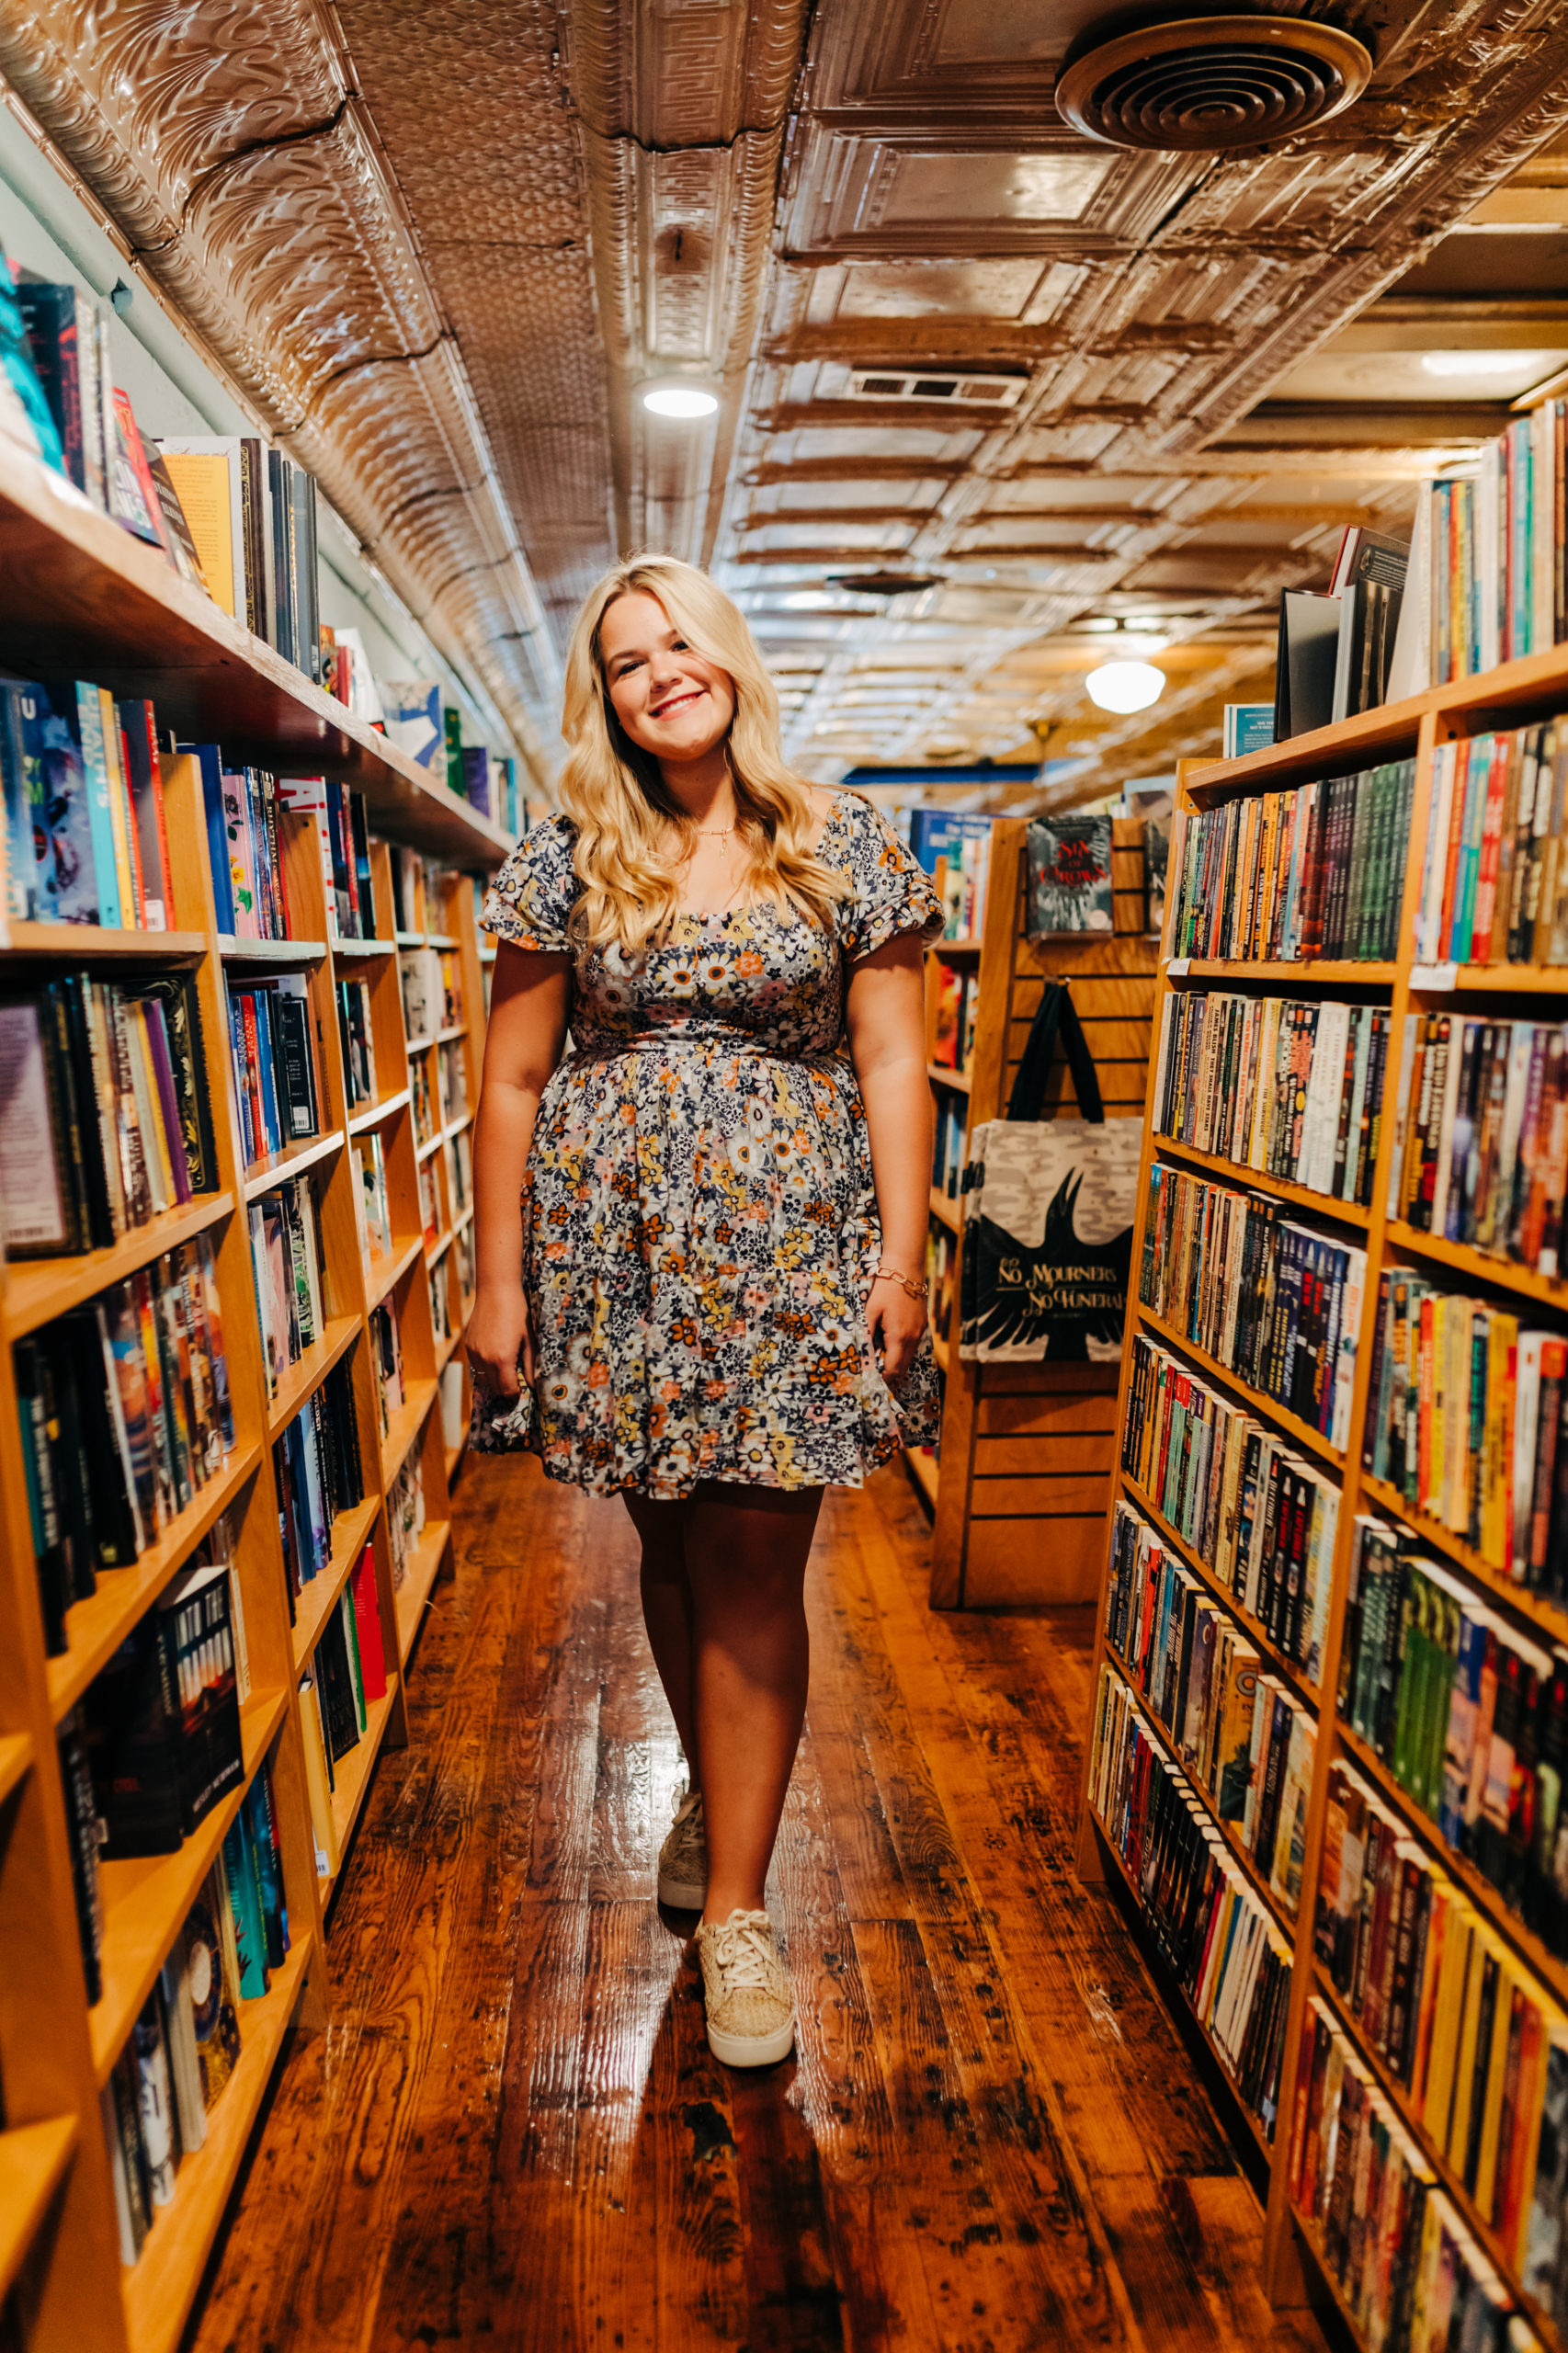 Augusta photographer captures high school senior walking through a book store for a Taylor Swift inspired senior photoshoot